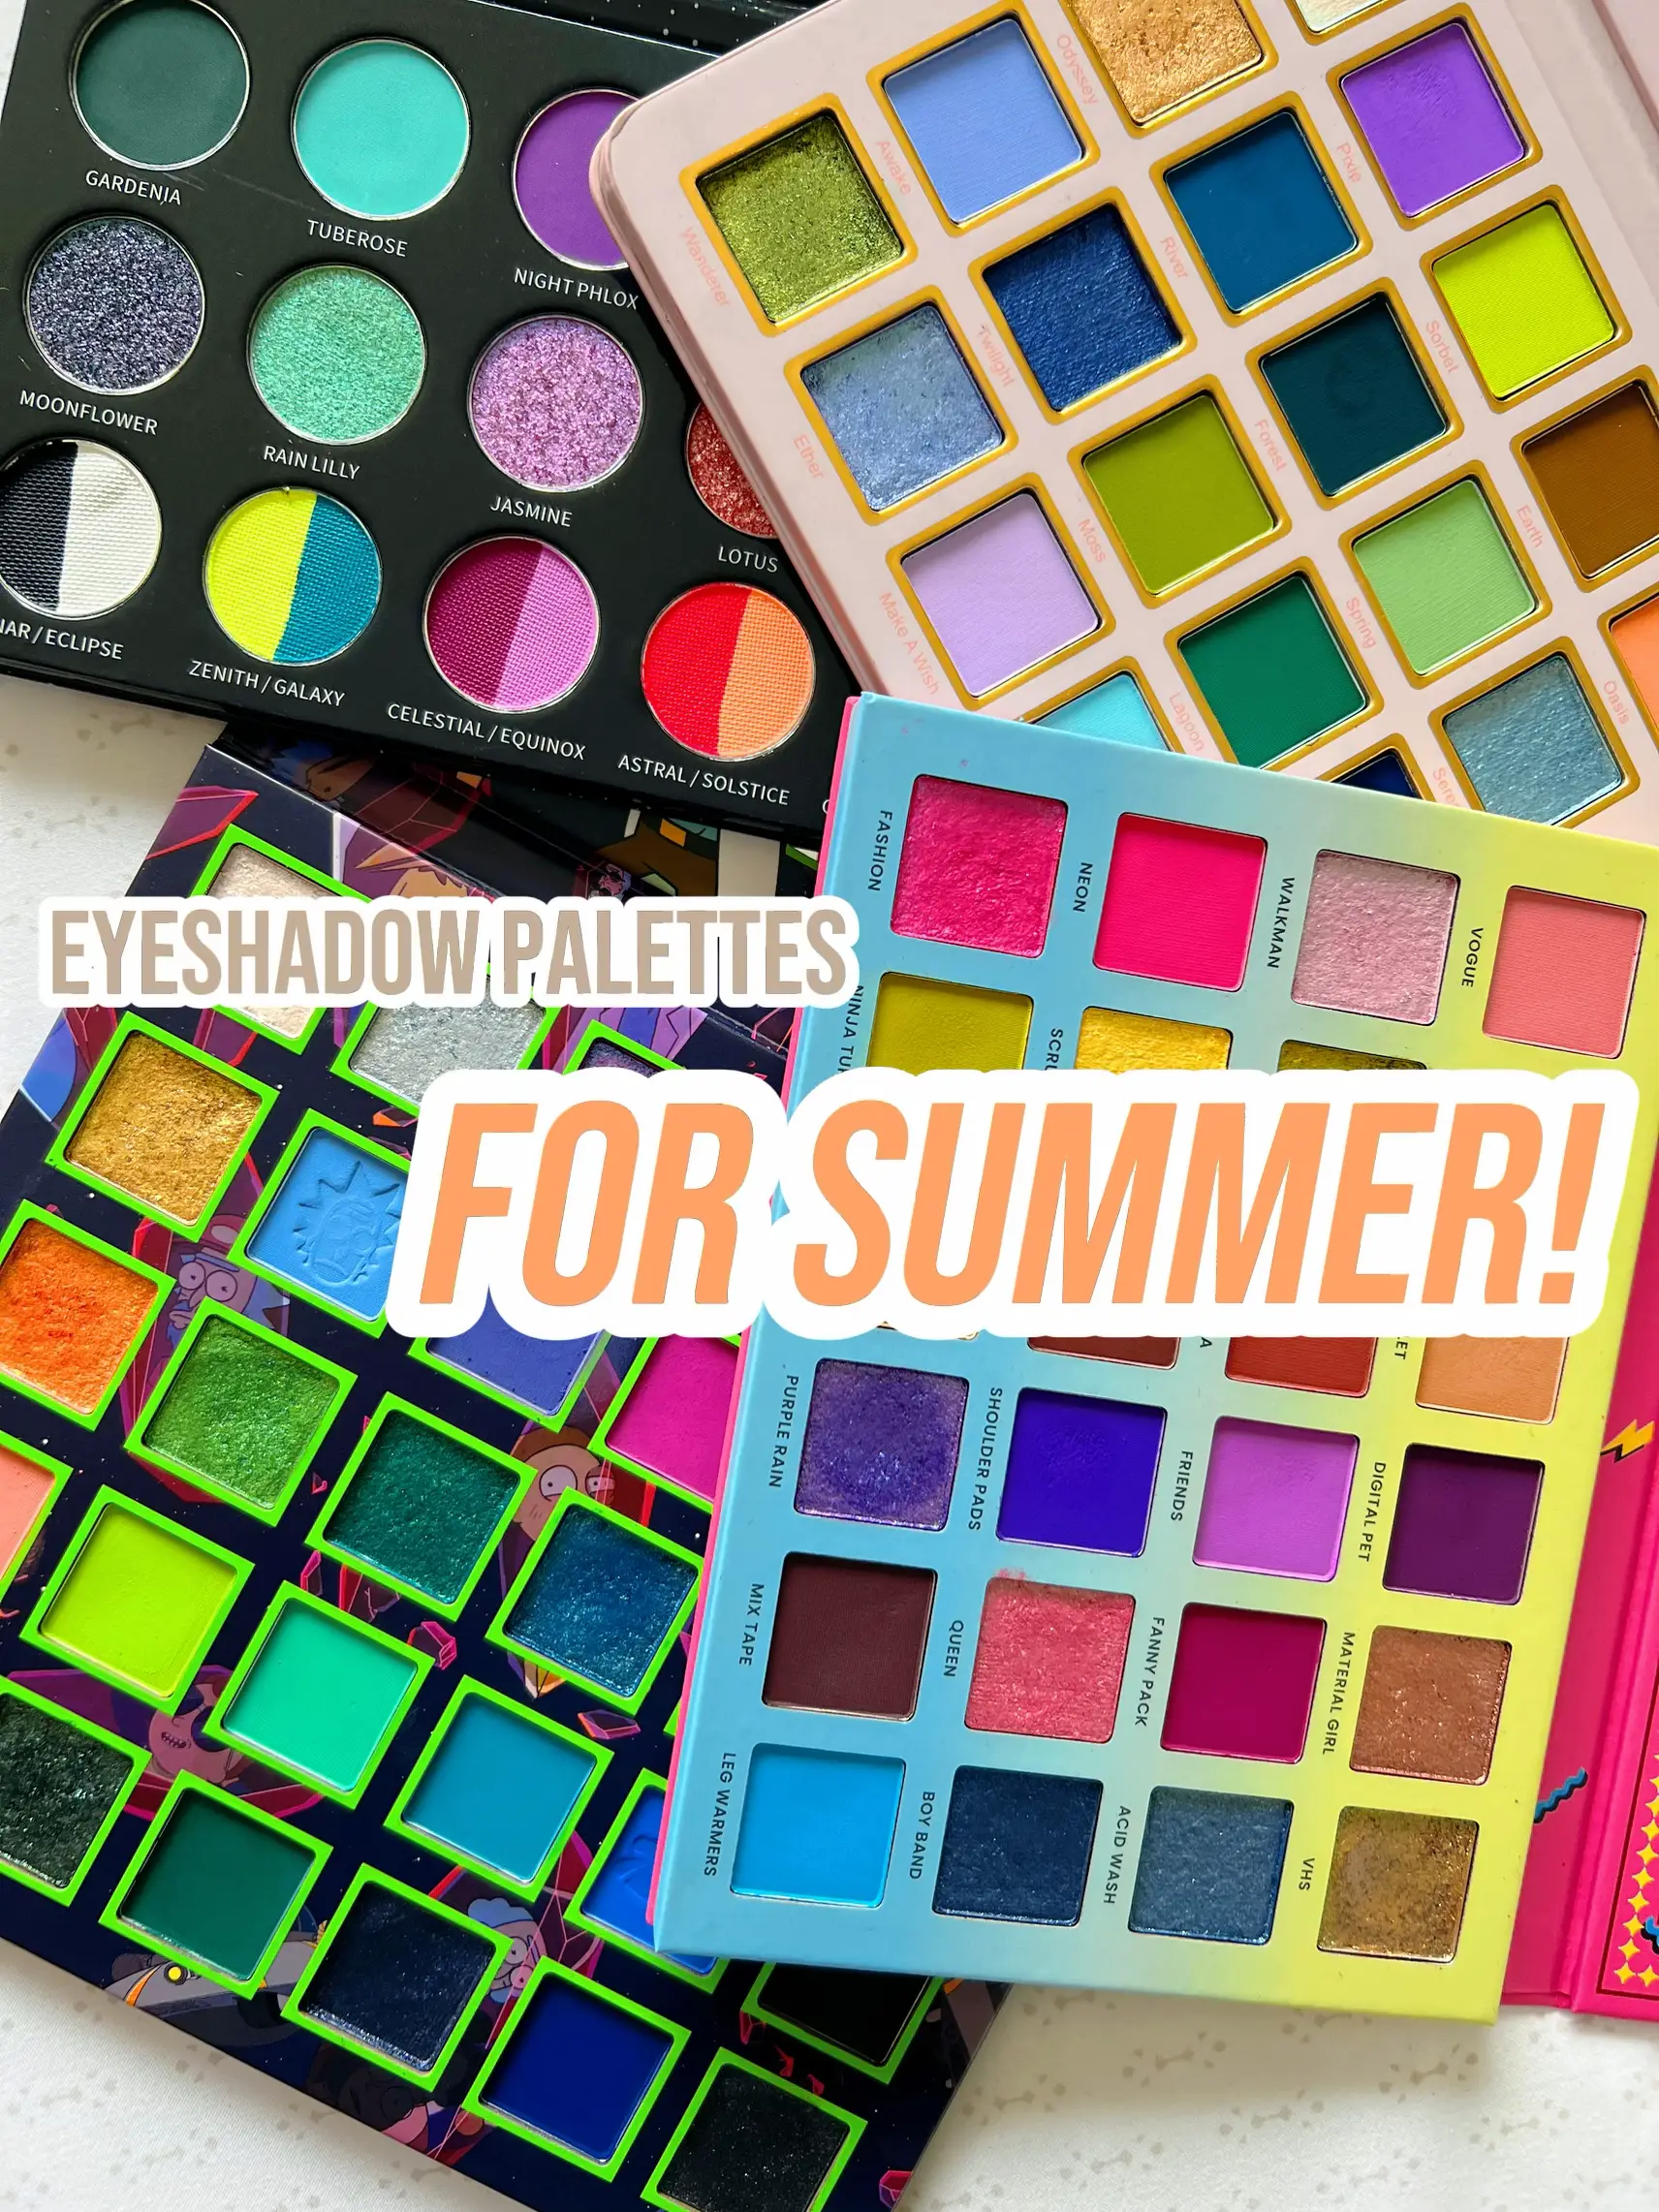 Top 5 Colourful Eyeshadow Palettes for Summer